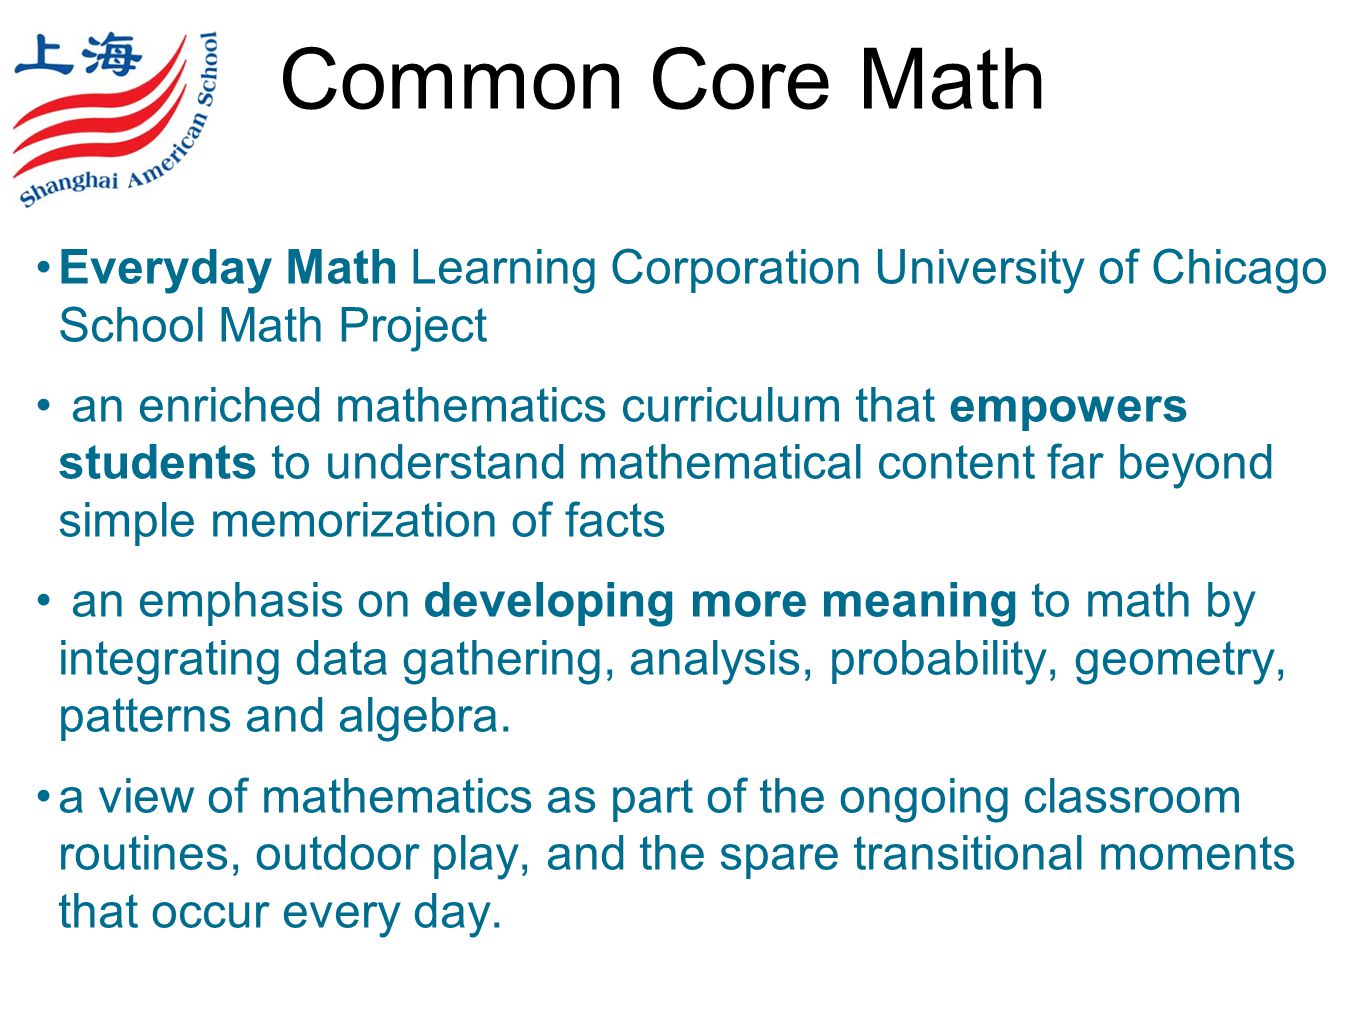 Common Core Math Everyday Math Learning Corporation University of Chicago School Math Project an enriched mathematics curriculum that empowers students to understand mathematical content far beyond simple memorization of facts an emphasis on developing more meaning to math by integrating data gathering, analysis, probability, geometry, patterns and algebra.